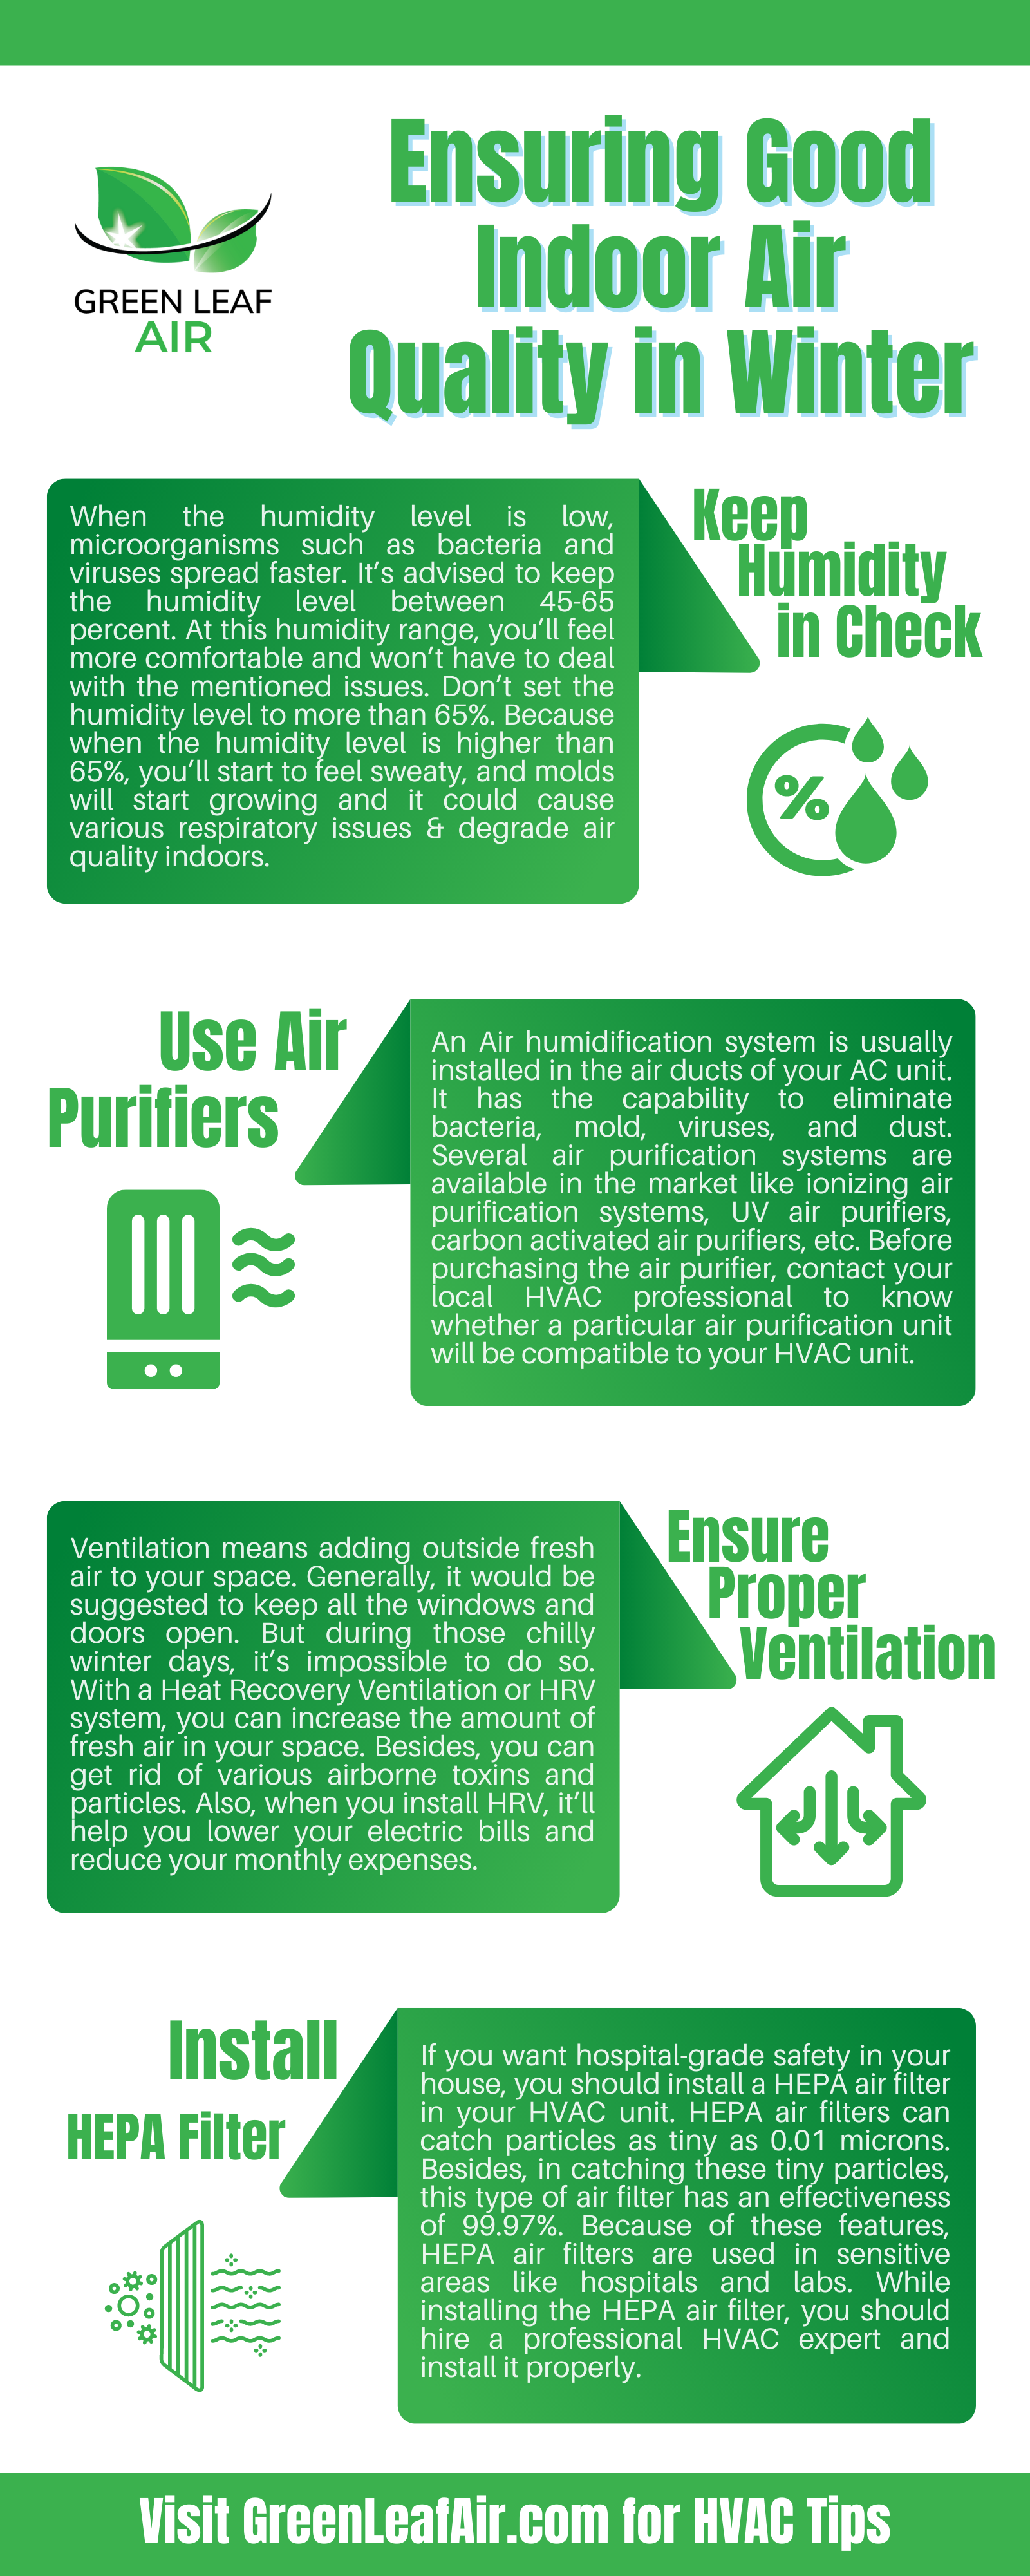 Ensuring Good Indoor Air Quality in Winter